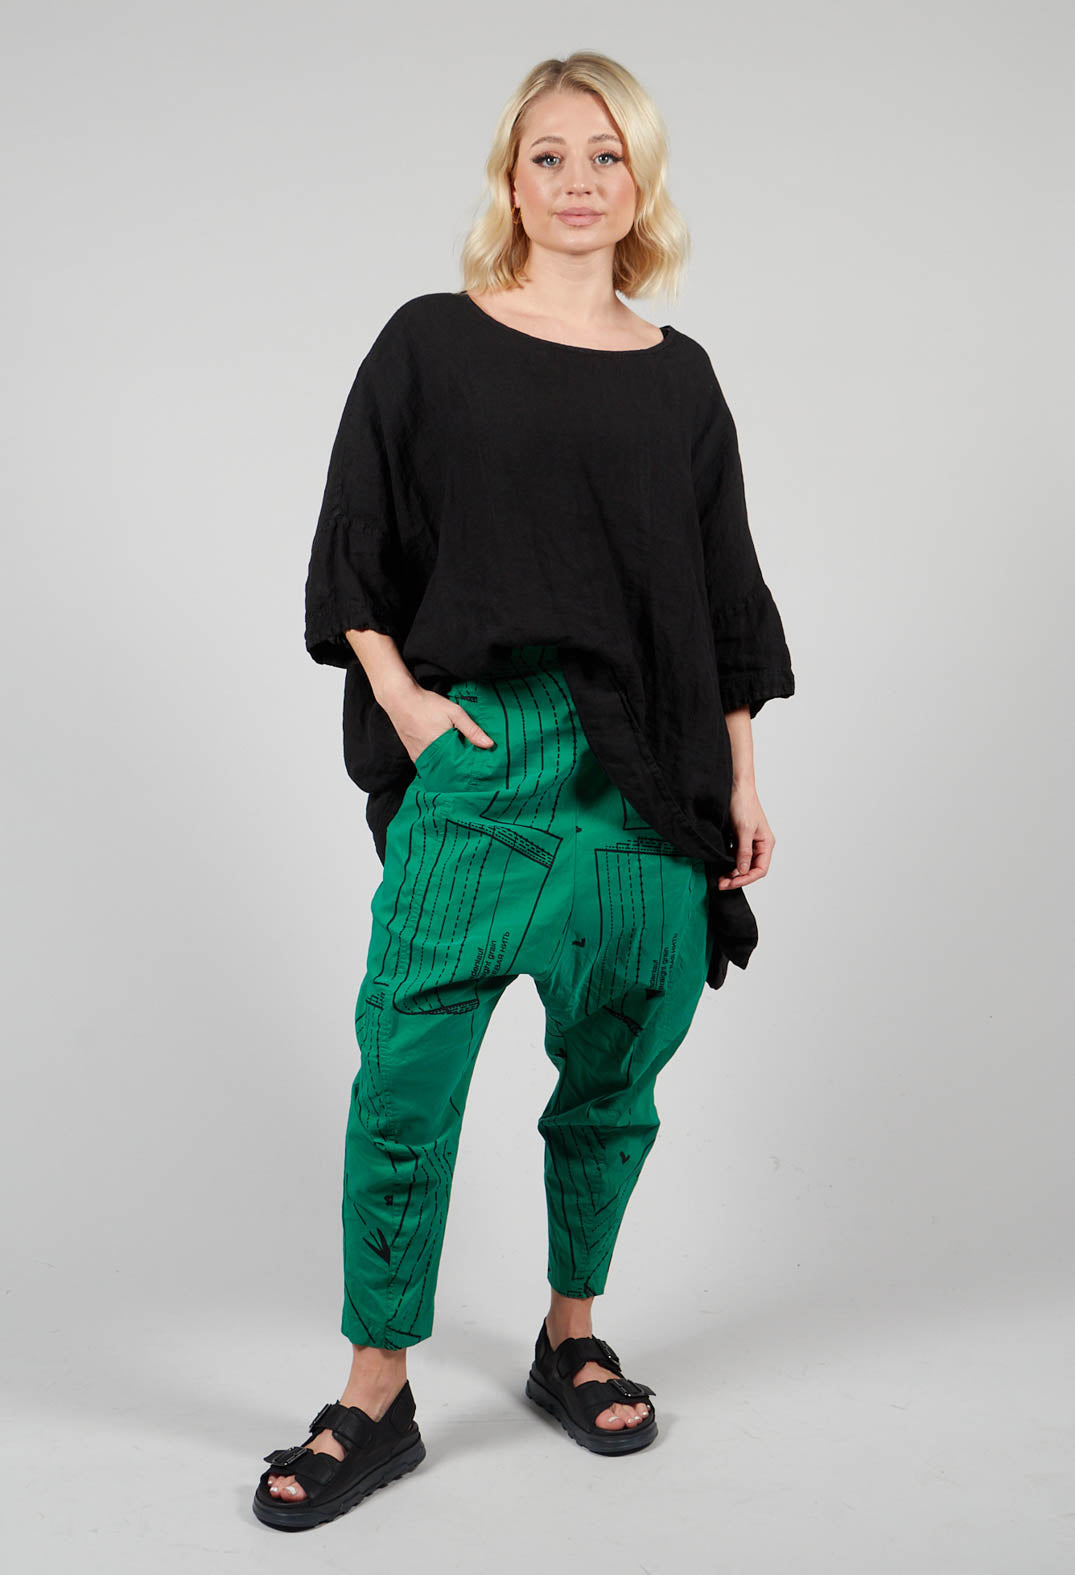 Pull On Drop Crotch Trousers in Apple Black Allover